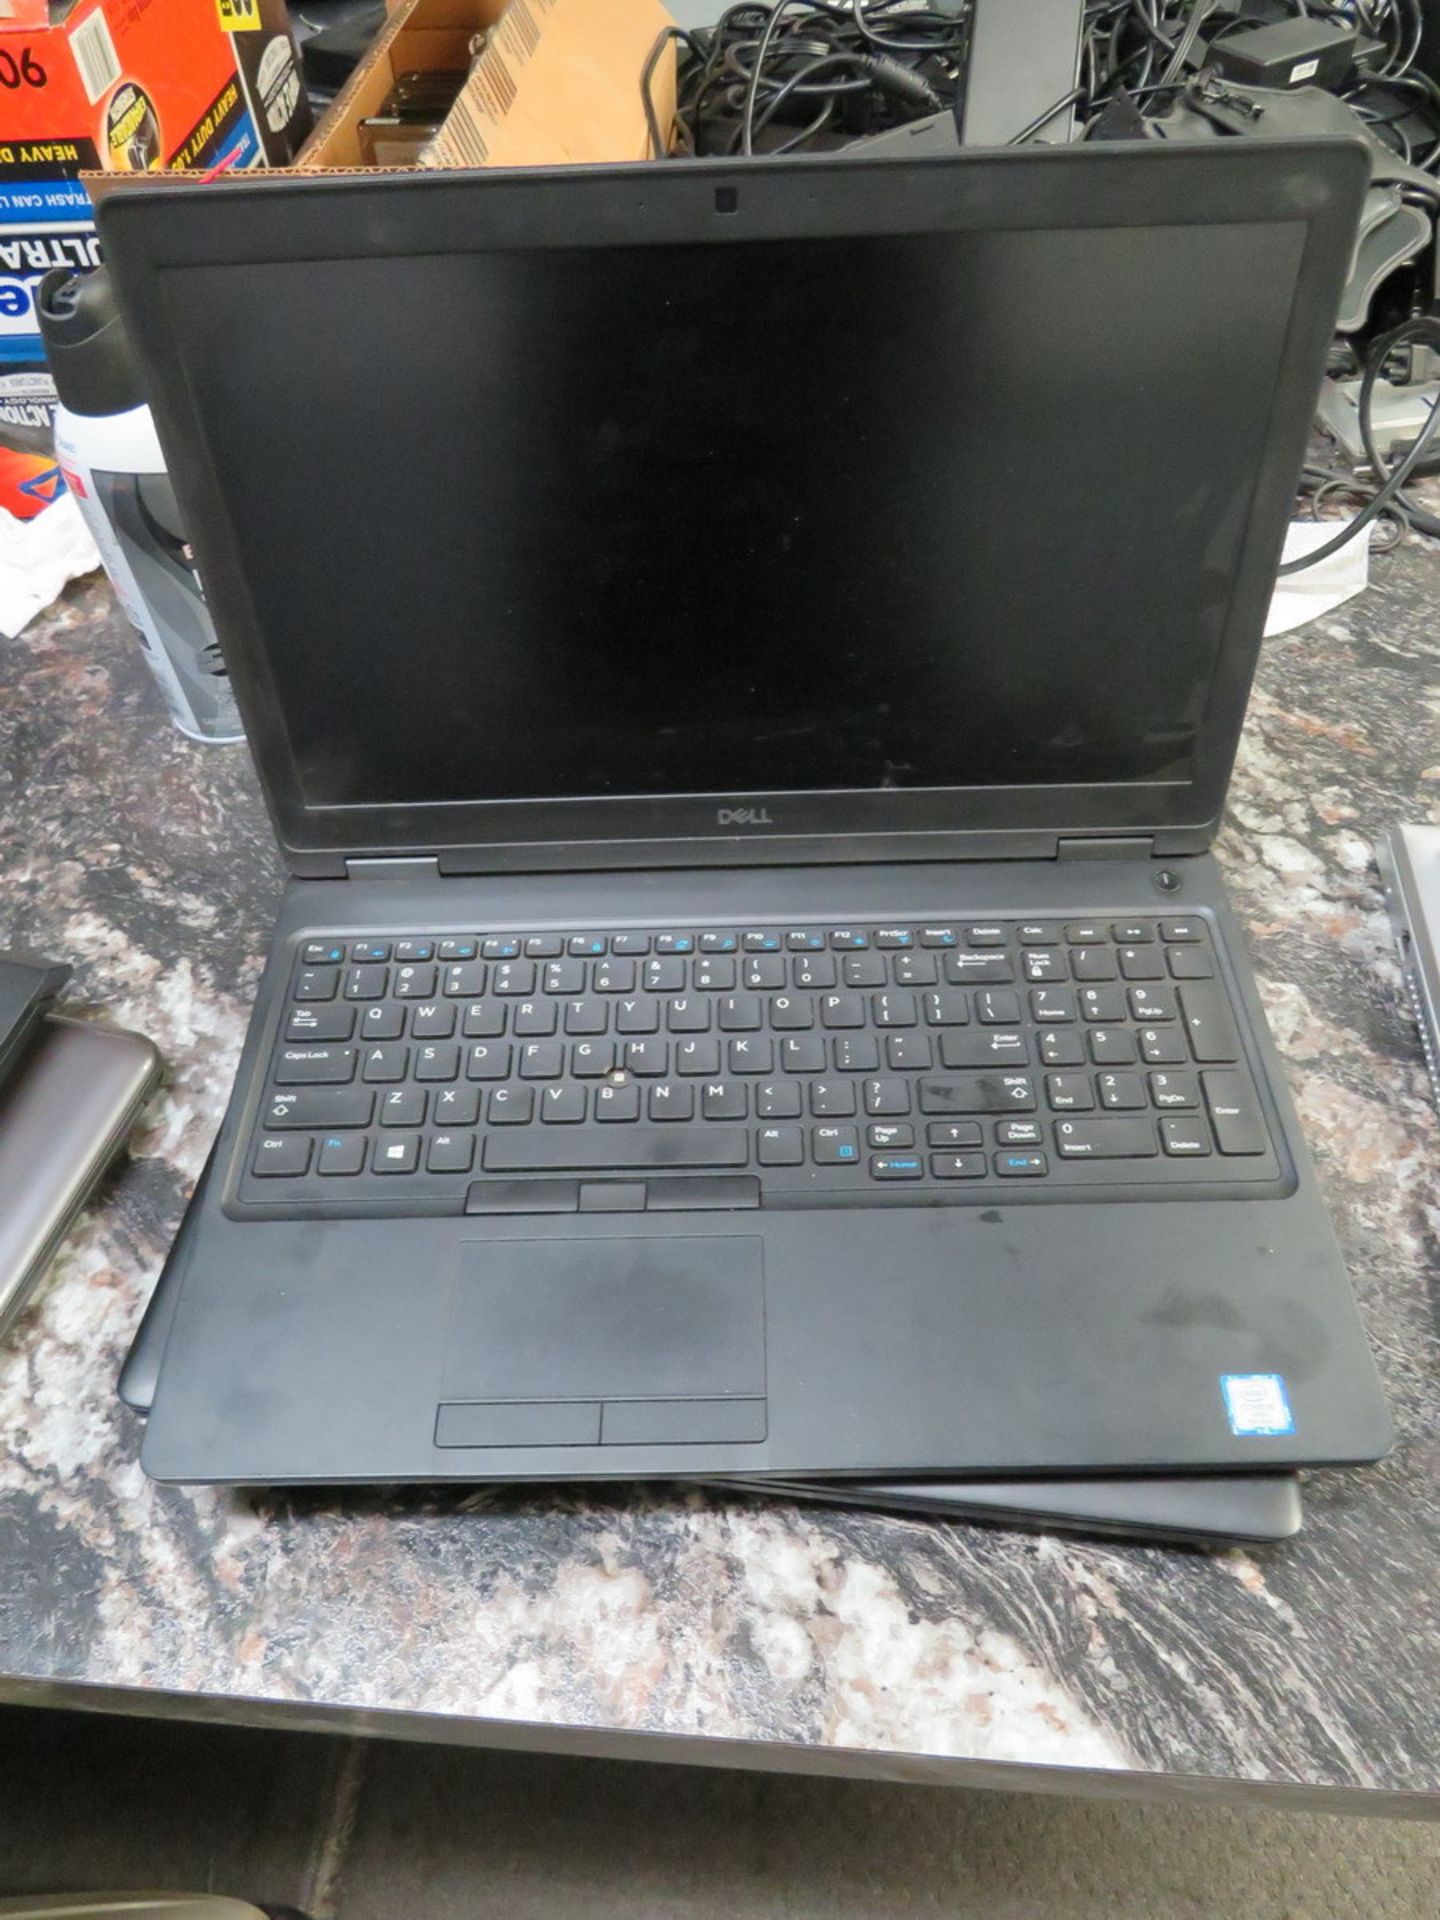 Dell Latitude 5590 Laptop Computers - Image 2 of 3